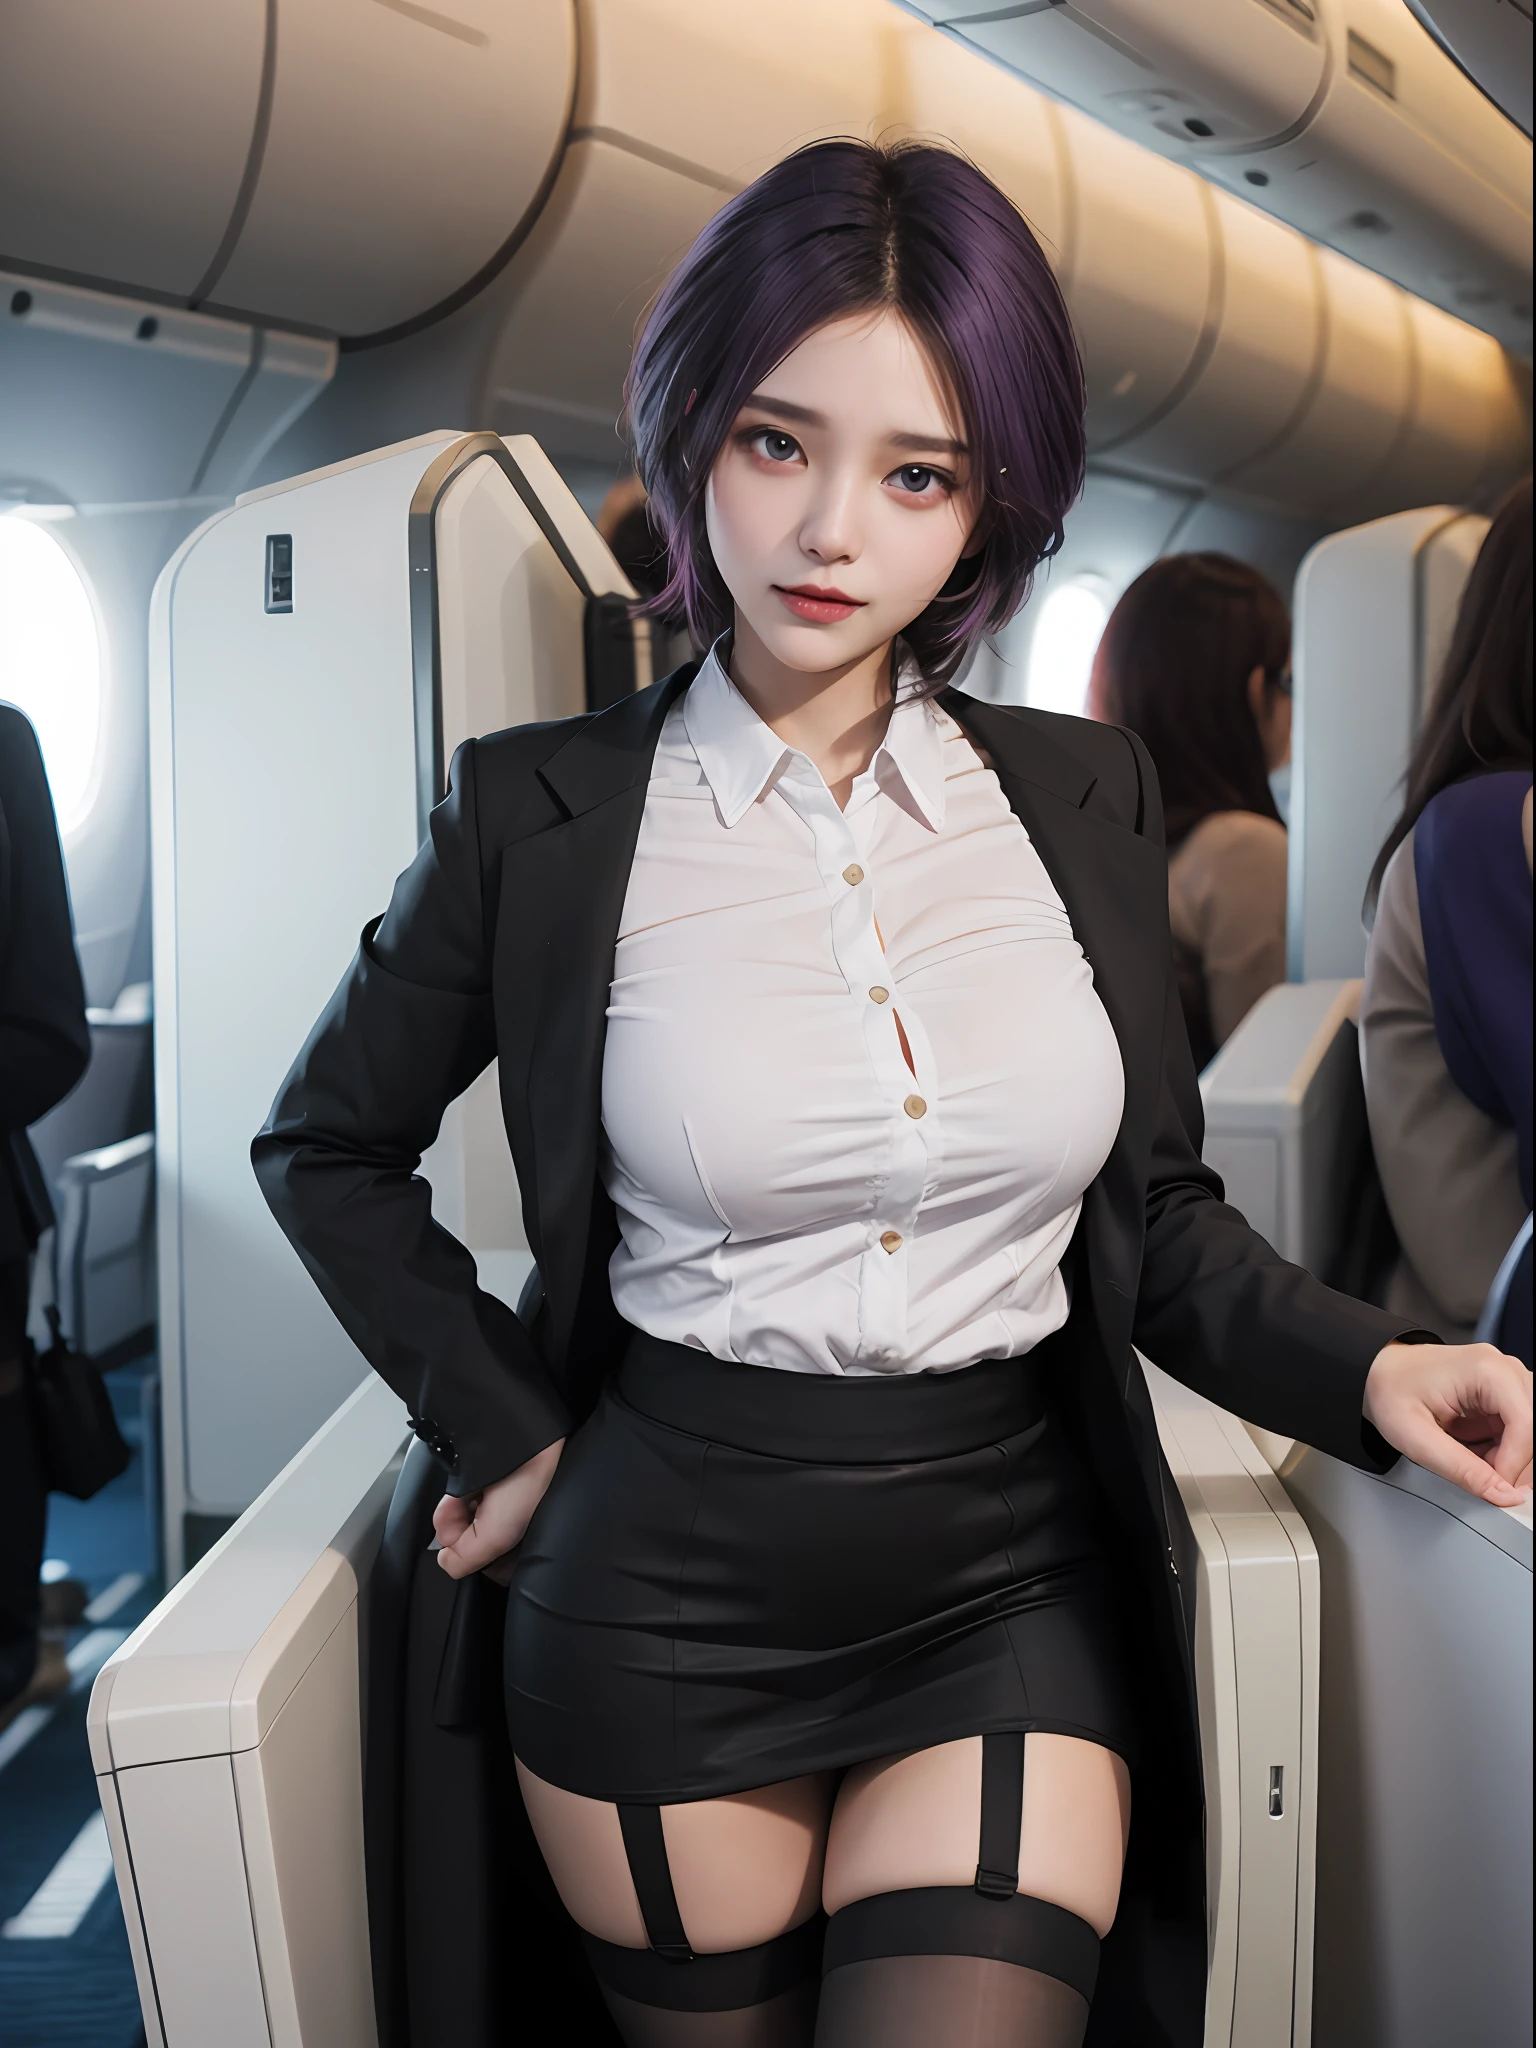 (Best quality: 1.1), (Realistic: 1.1), (Photography: 1.1), (highly details: 1.1), (1womanl), Airline flight attendants,Red coat,White shirt,Short skirt,black lence stockings,bent down,In the plane,KafkaHKS,Hong Kong,Purple eyes, Purple hair, eyewear on head, sunglasses,Large breasts,